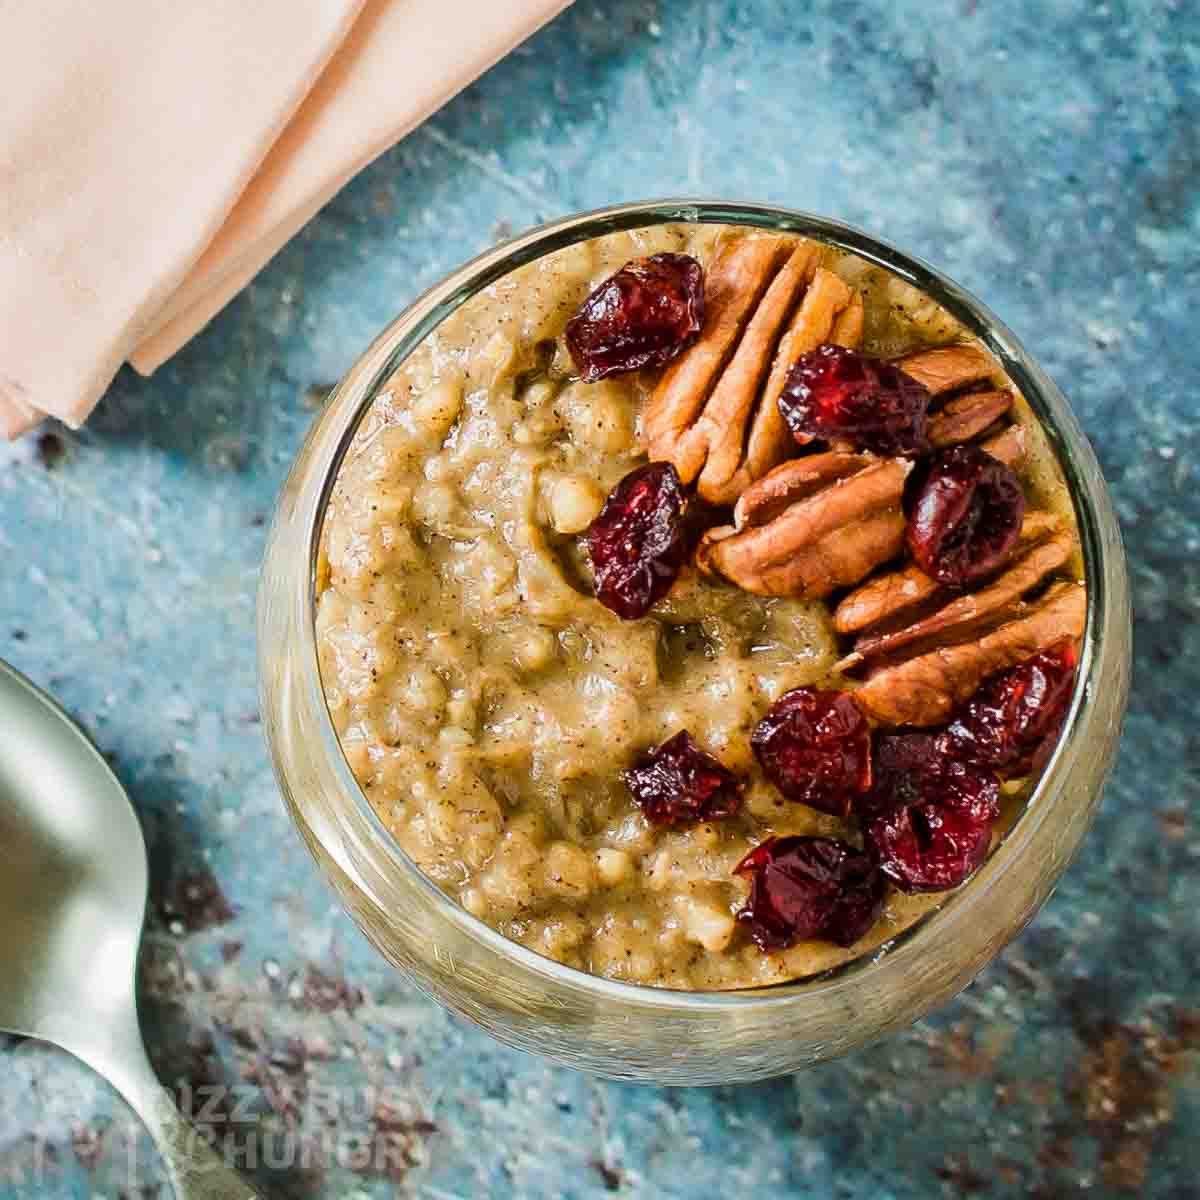 Overhead shot of overnight oats in a clear glass cup garnished with pecans and cranberries on a blue speckled surface with a spoon and peach colored napkins in the background.